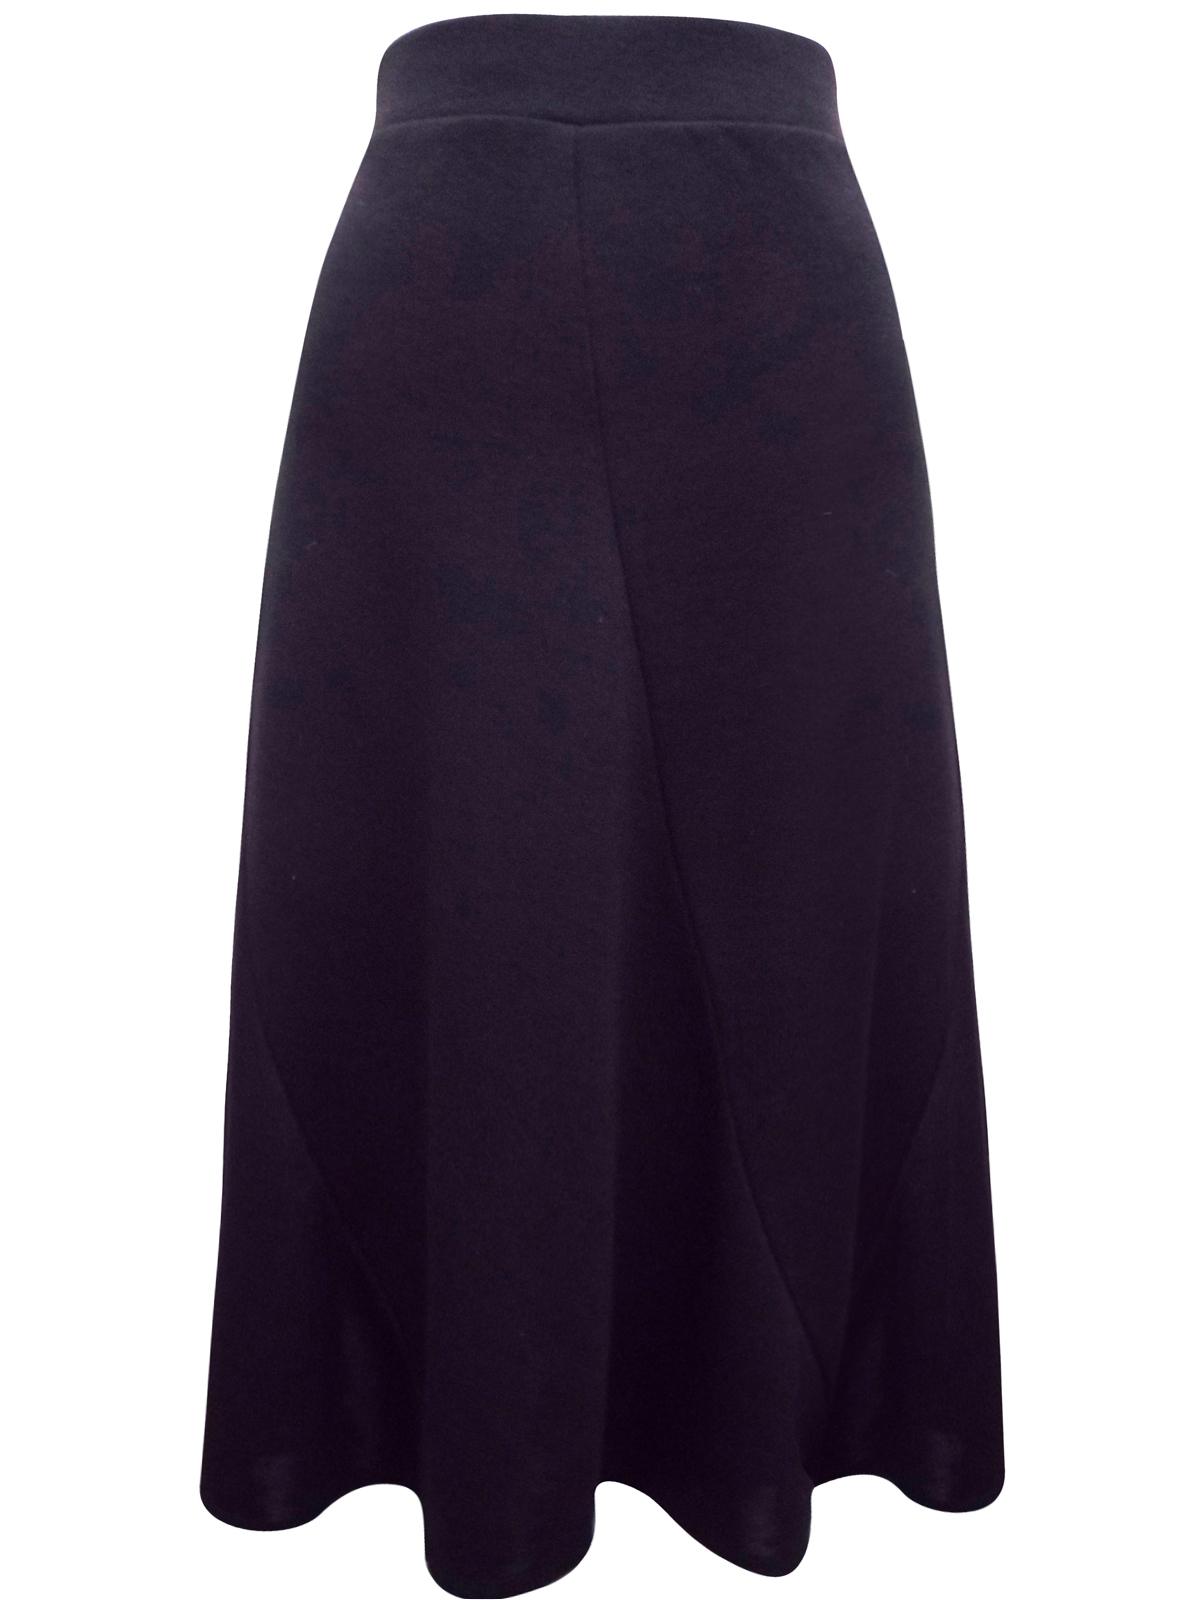 Assorted BLACK Skirts - Size 10 to 16